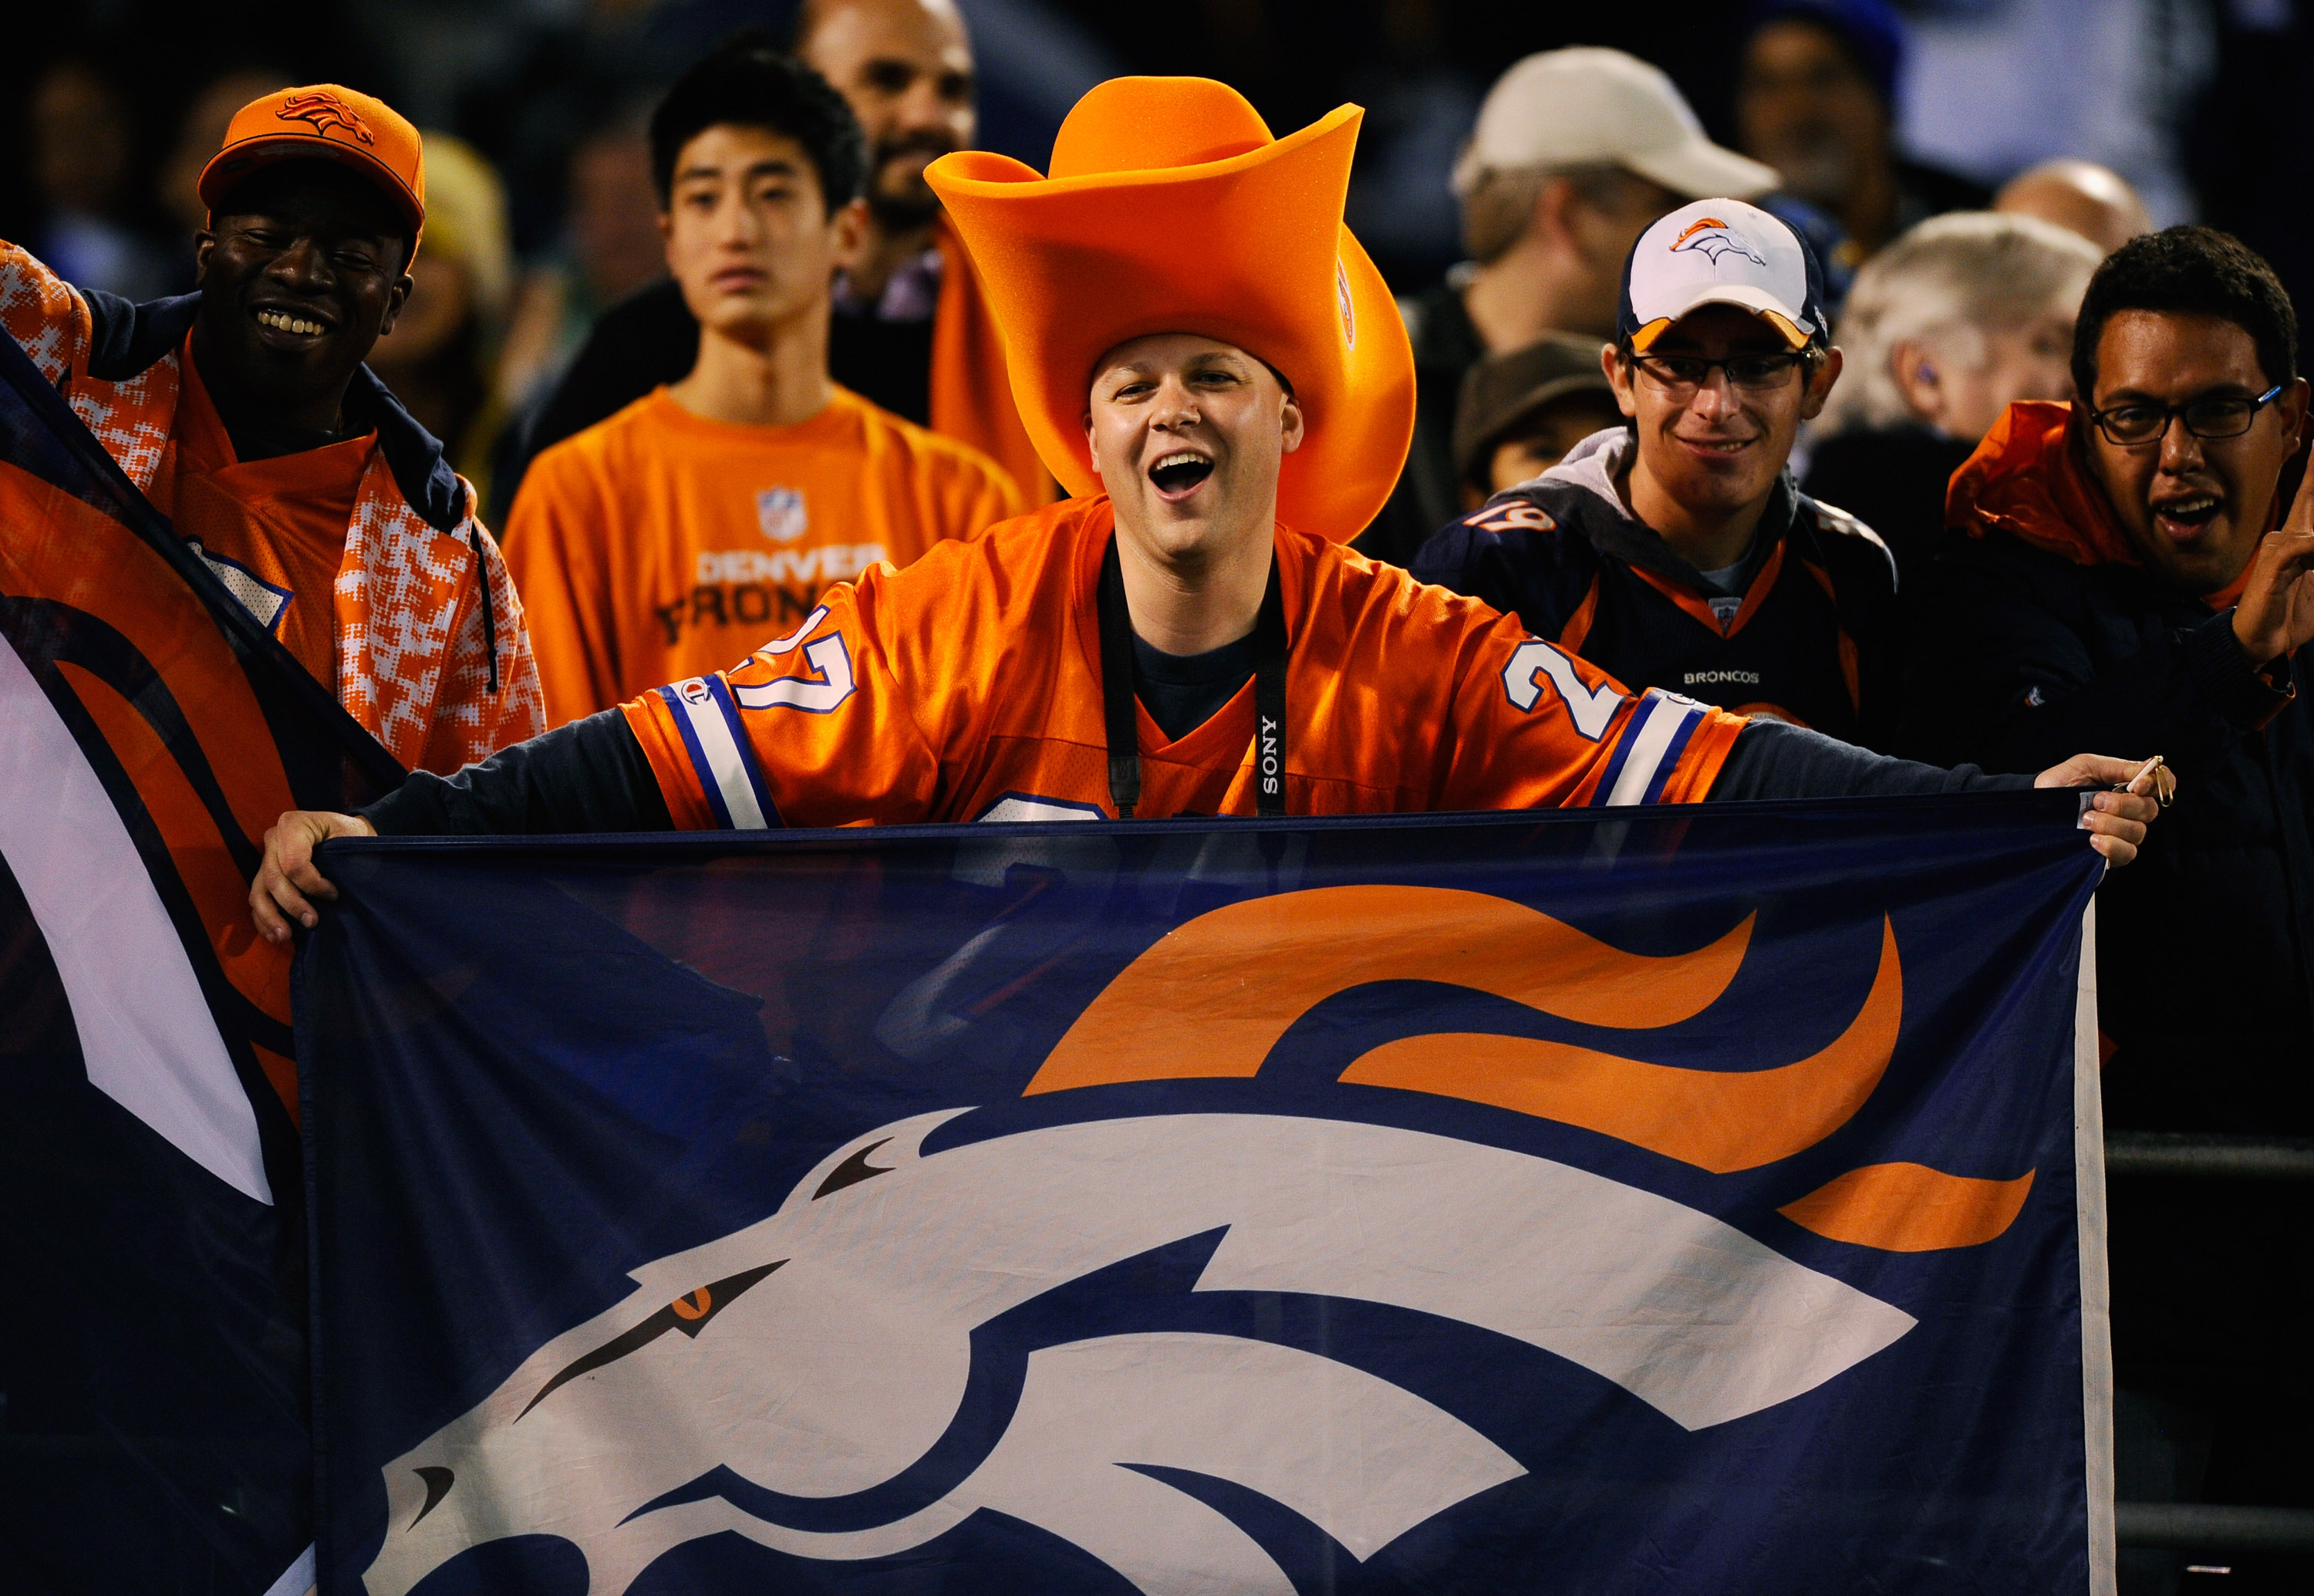 SAN DIEGO - NOVEMBER 22:  A Denver Bronco fan cheers during the NFL football game against  San Diego Chargers at Qualcomm Stadium on November 22, 2010 in San Diego, California.  (Photo by Kevork Djansezian/Getty Images)